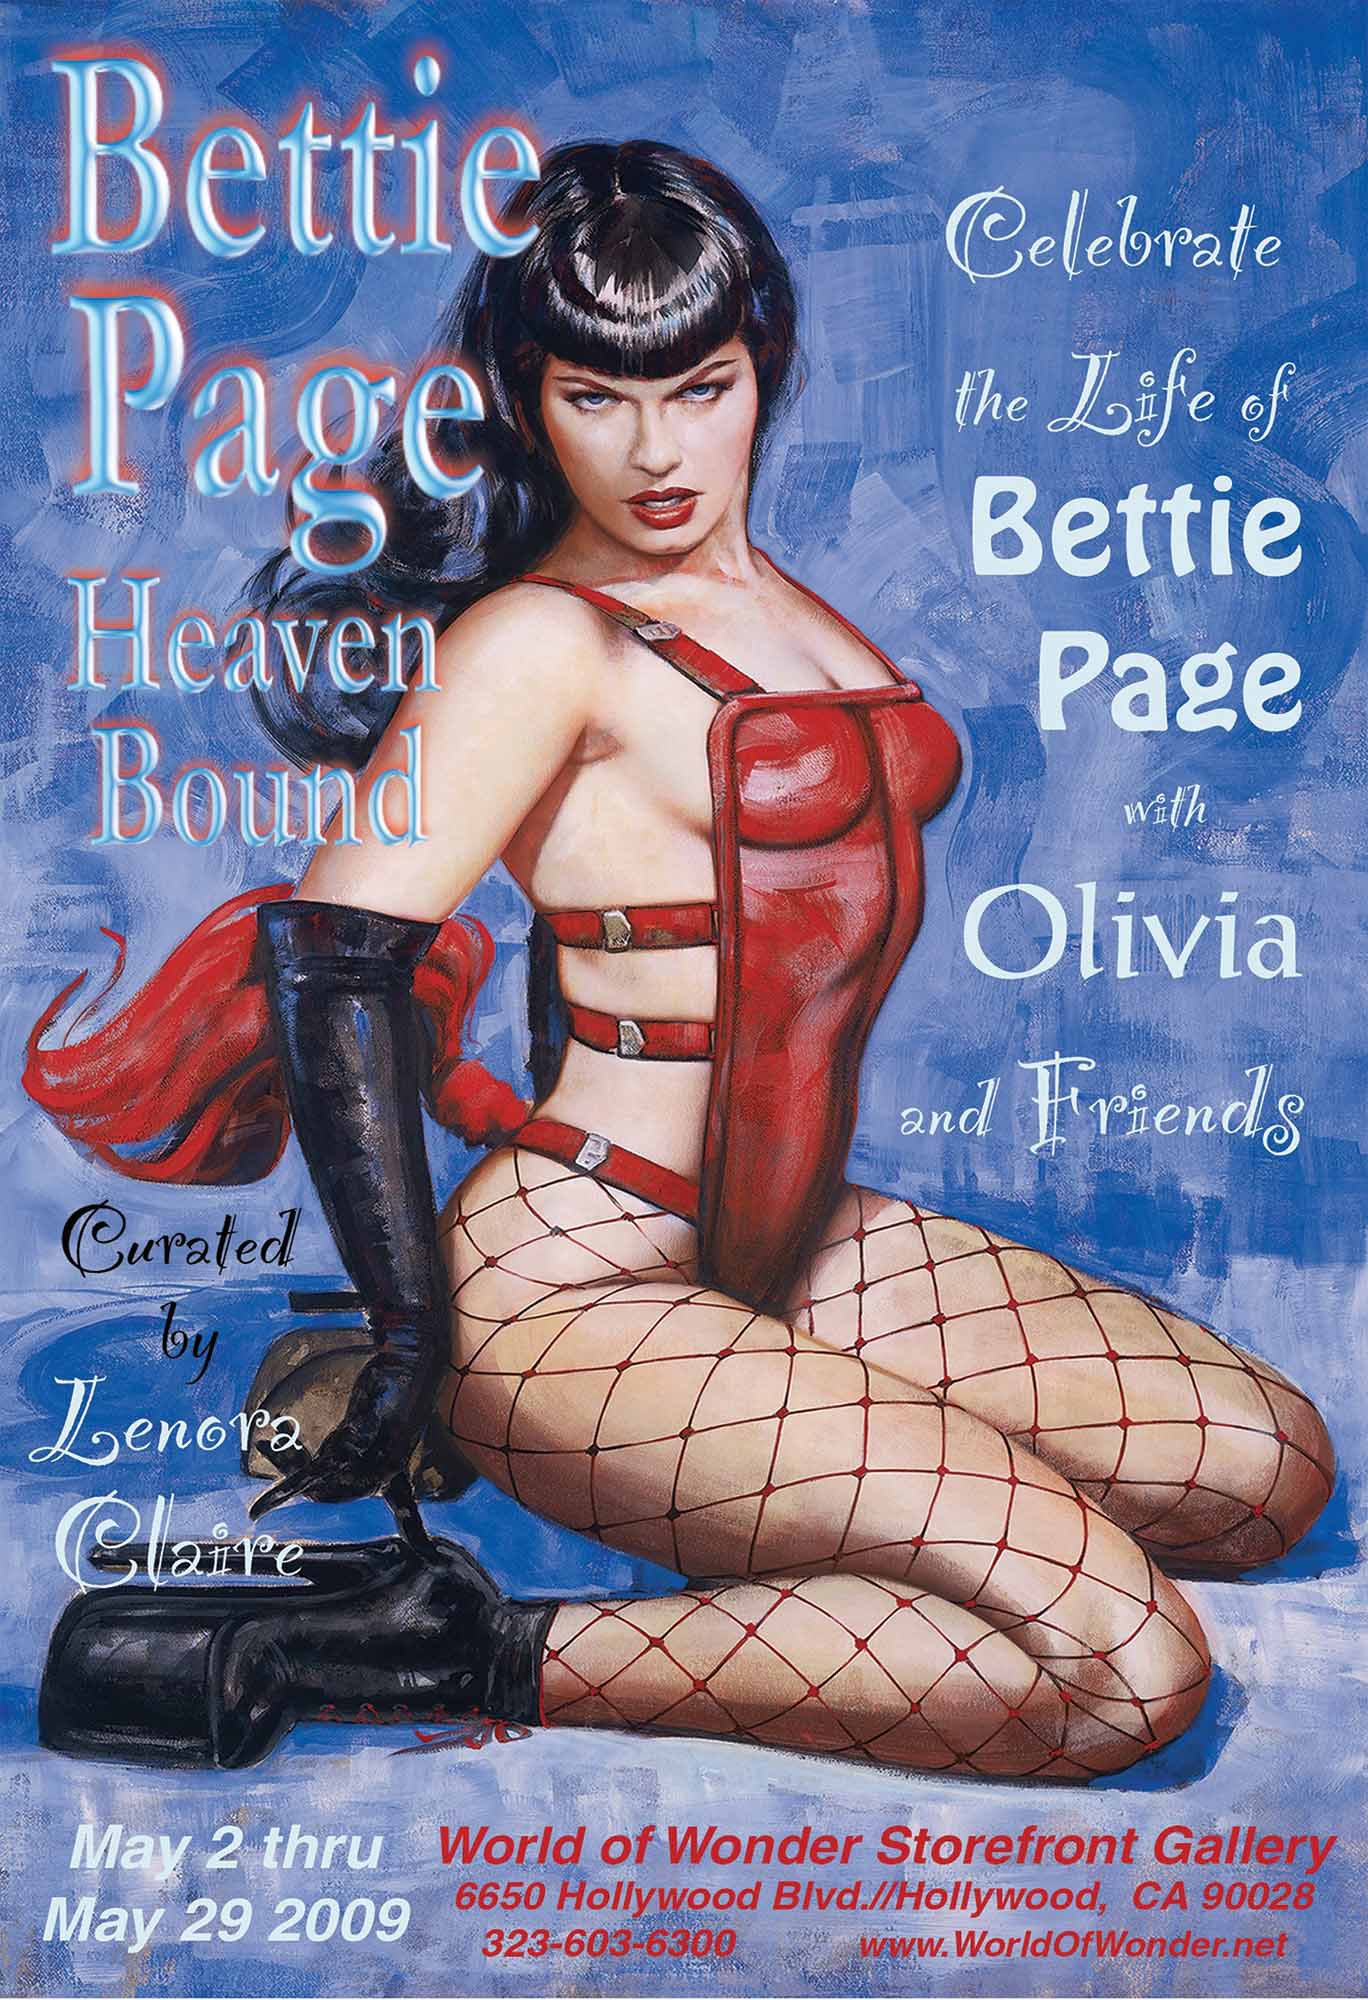 BETTIE PAGE MOVIE POSTER 2 Ltd Edition on Paper